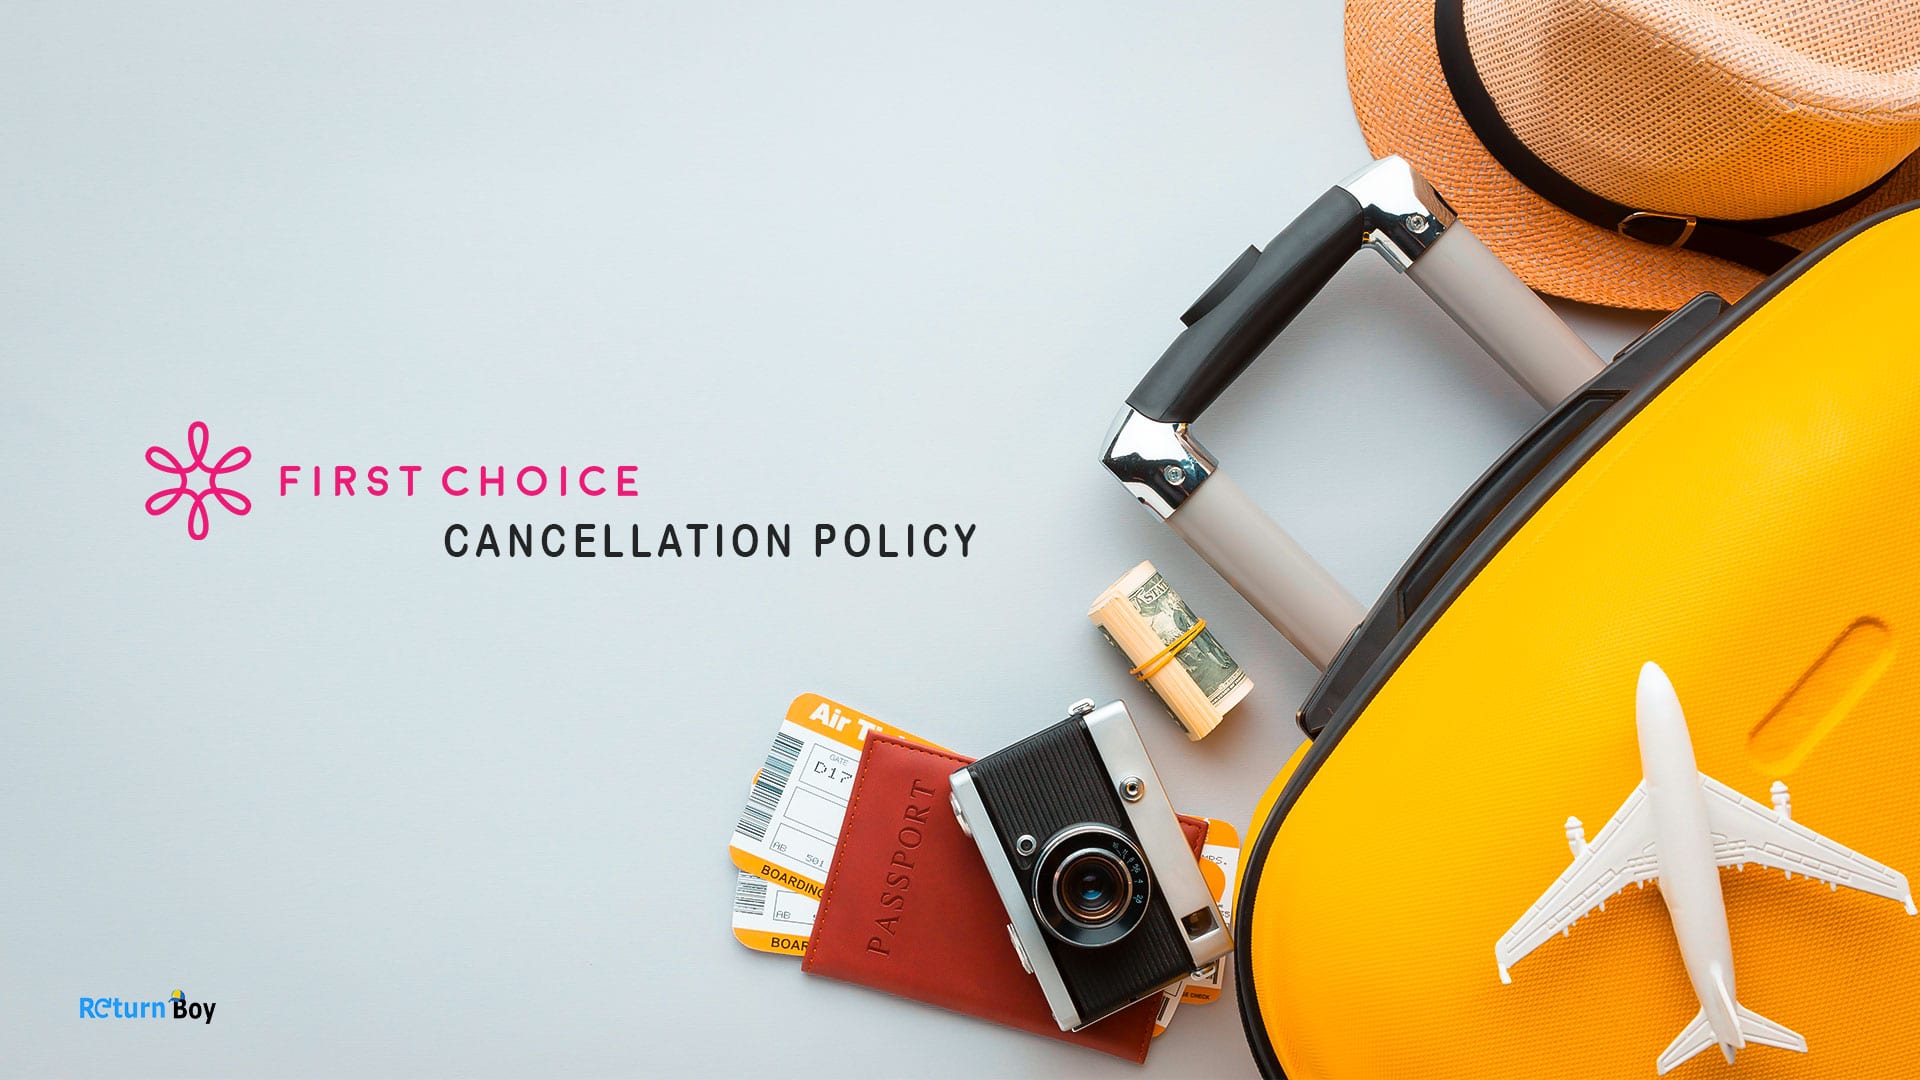 First Choice Cancellation Policy